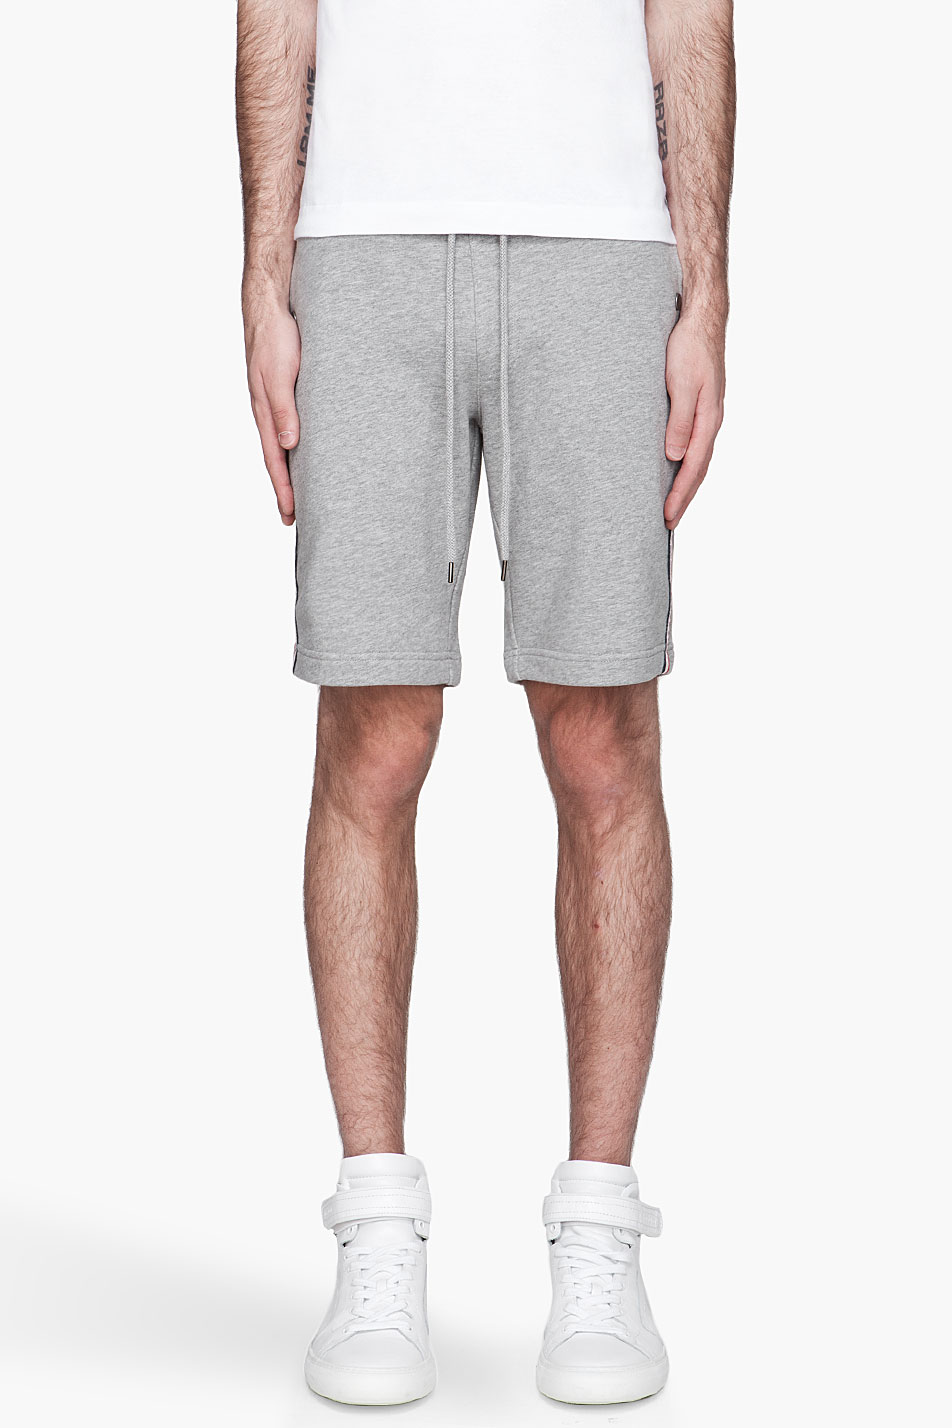 Lyst Moncler Heather Grey Signaturestriped Sweat Shorts In Gray For Men